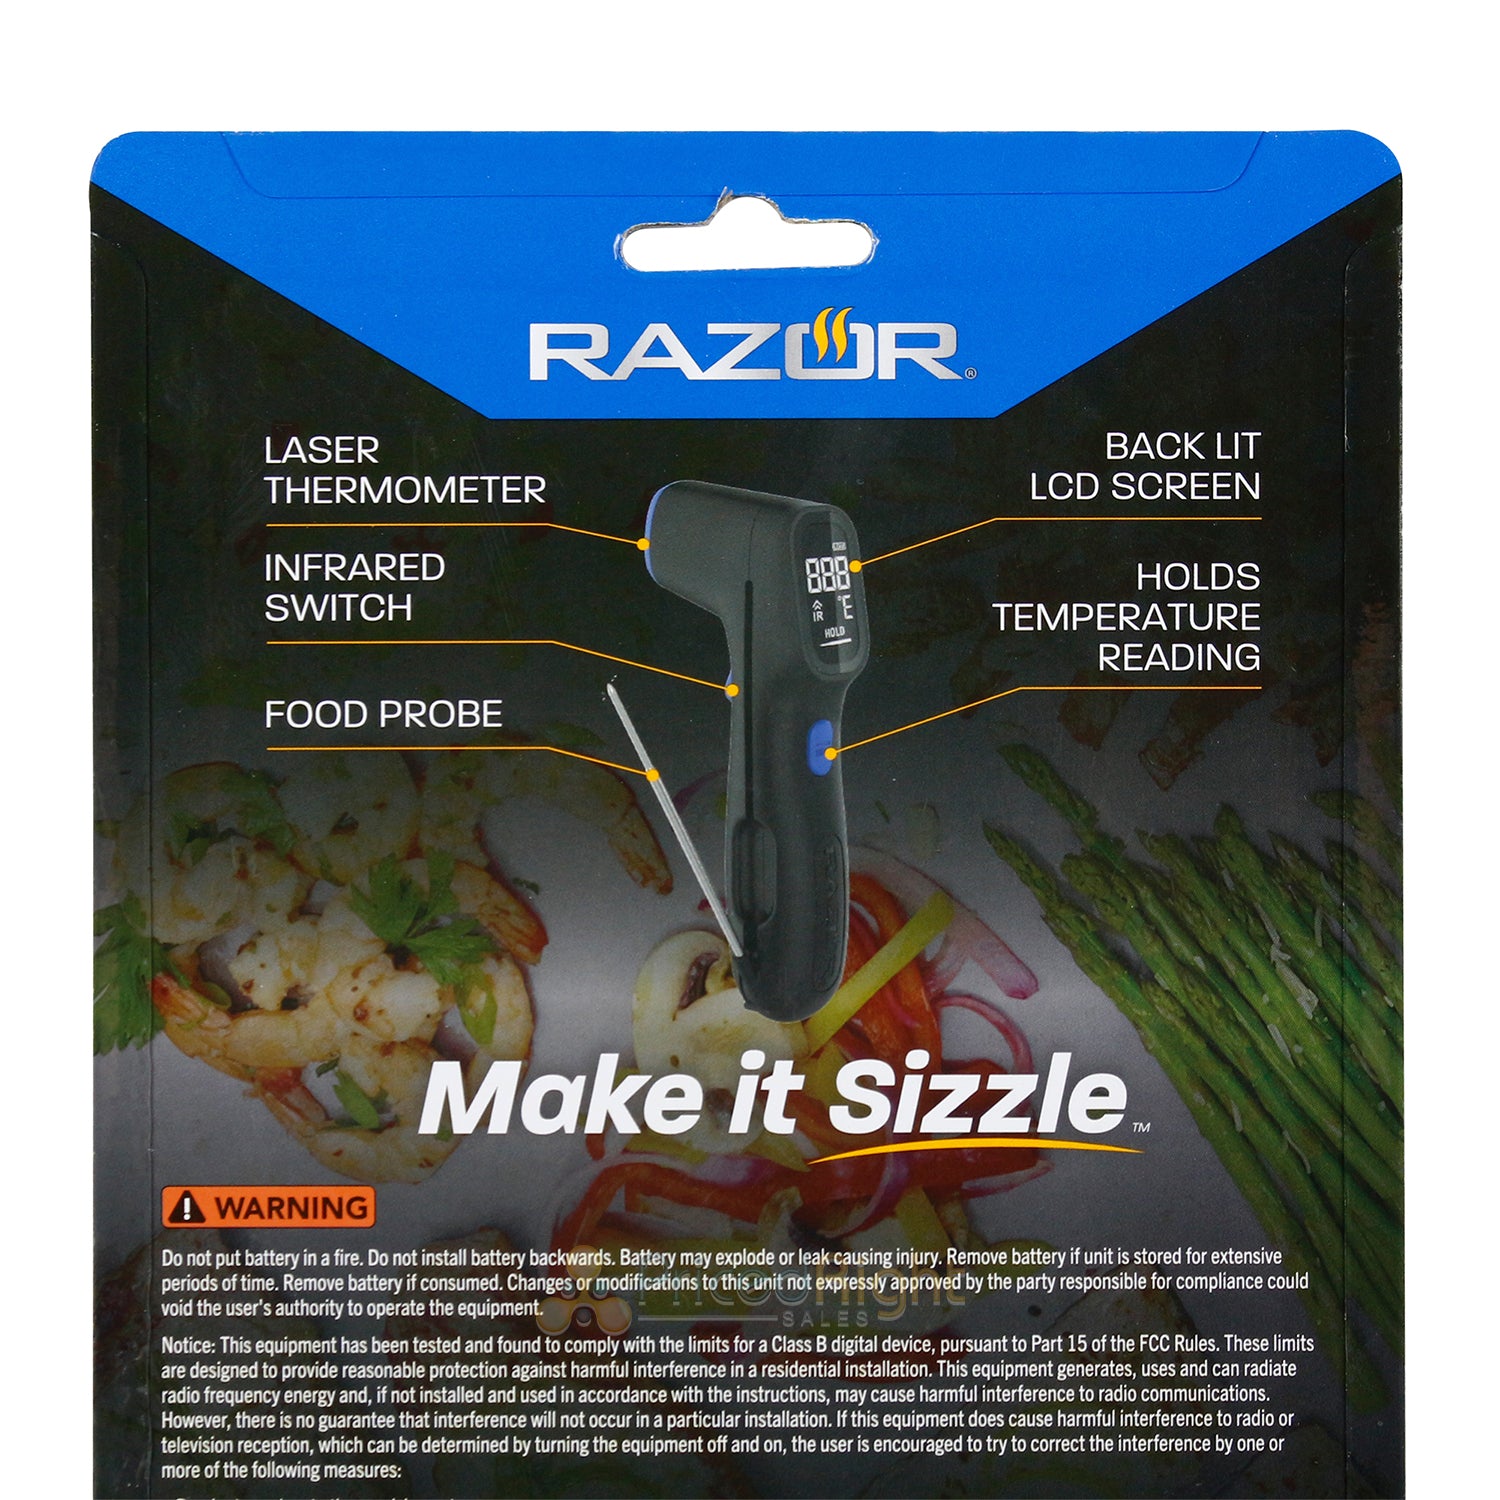 Razor Infrared Laser Digital Thermometer & Instant Food Probe W/ LCD Screen